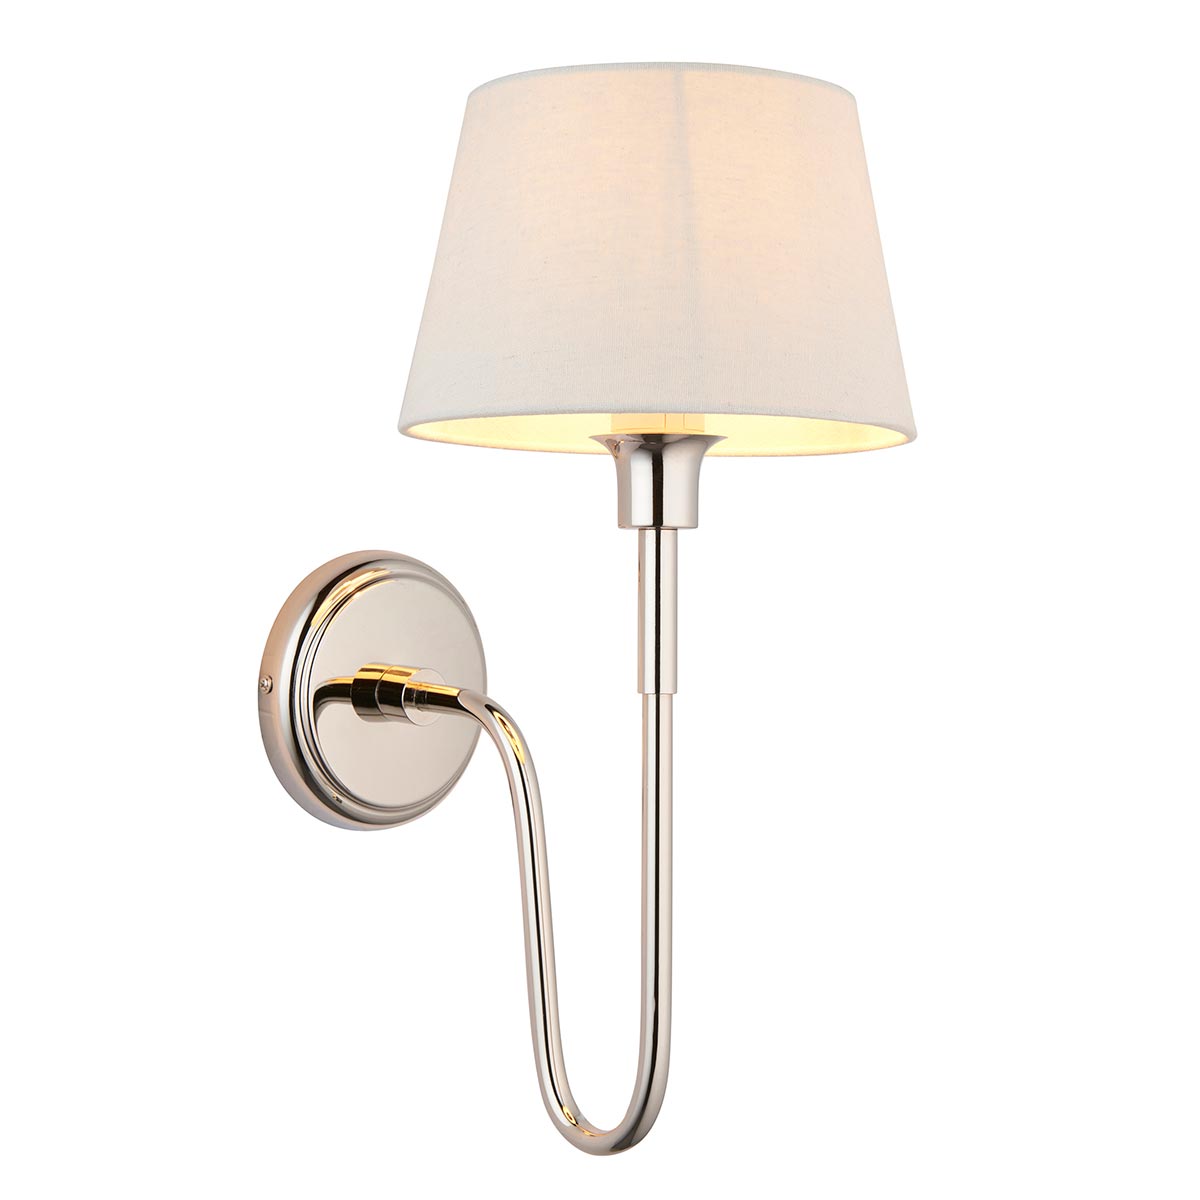 Endon Rouen Polished Nickel Wall Light With Ivory Shade